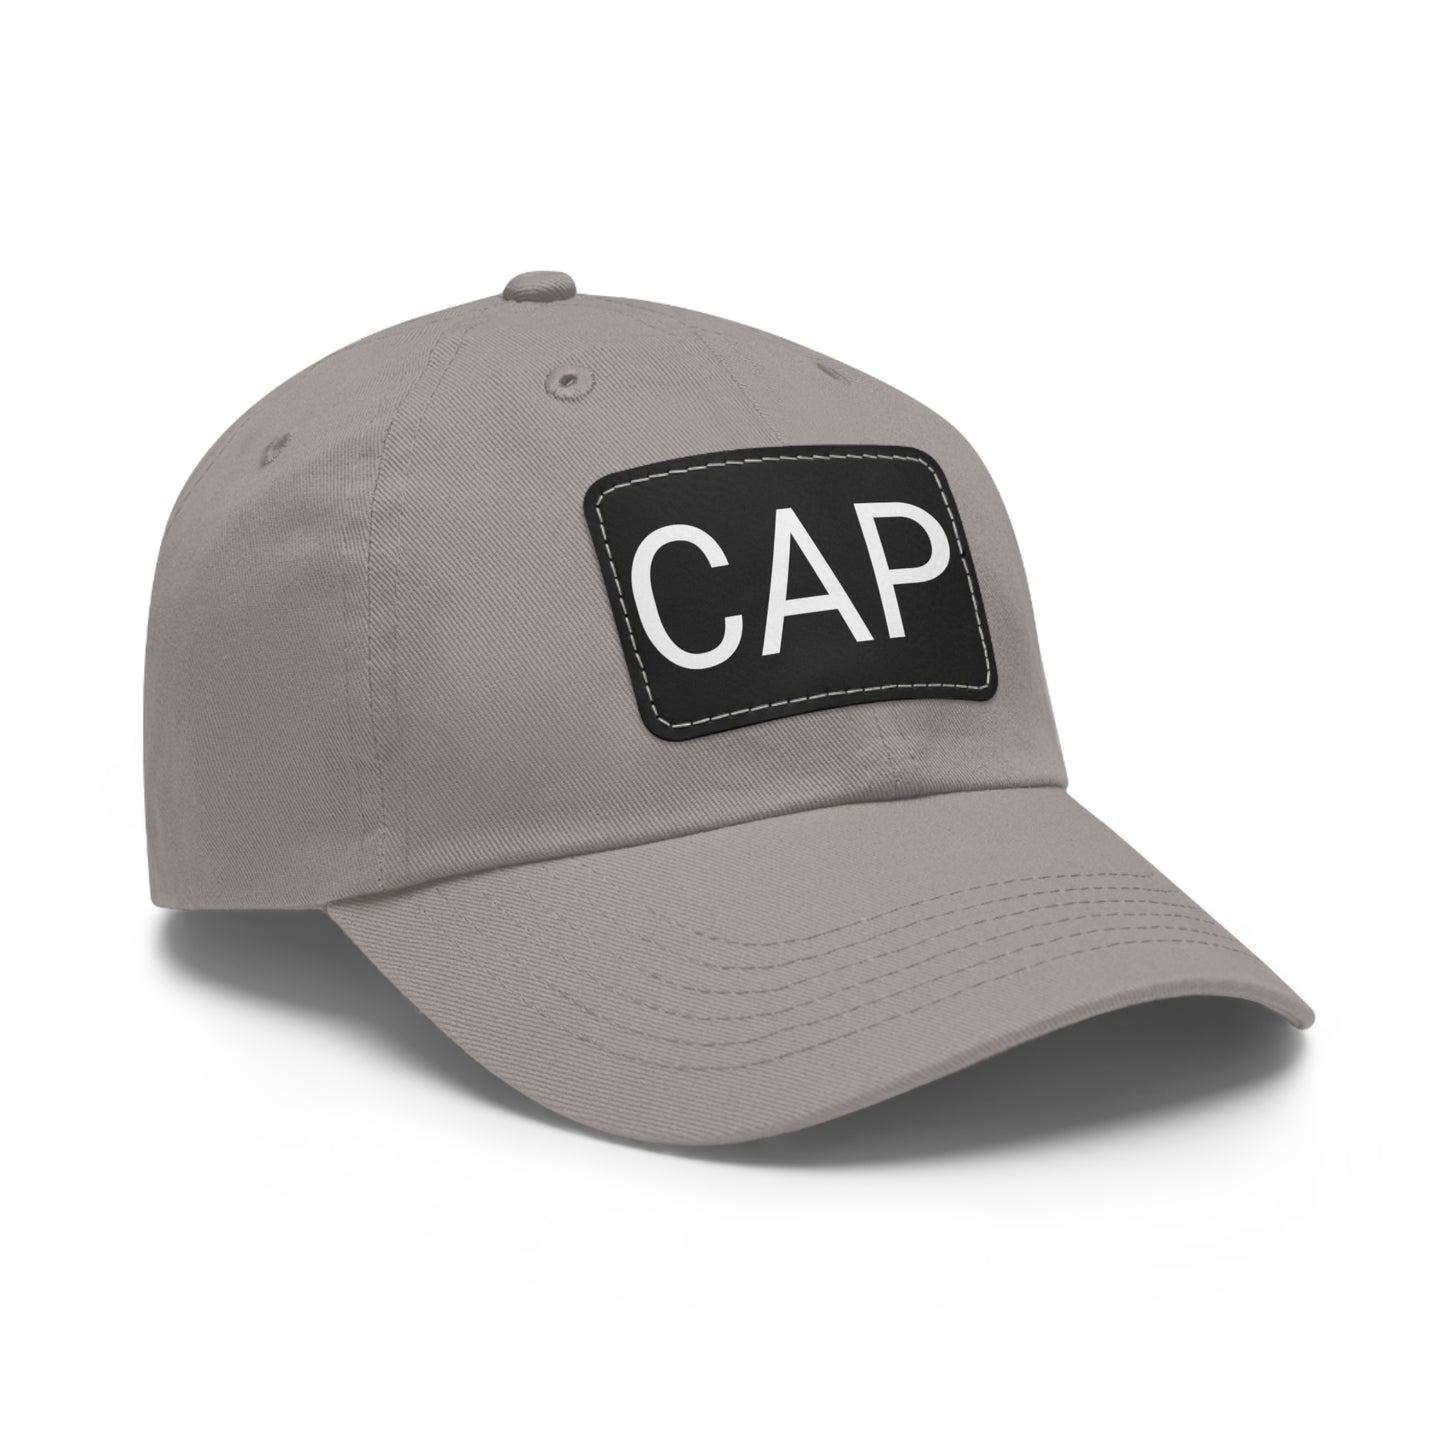 "CAP" Cap with Leather Patch